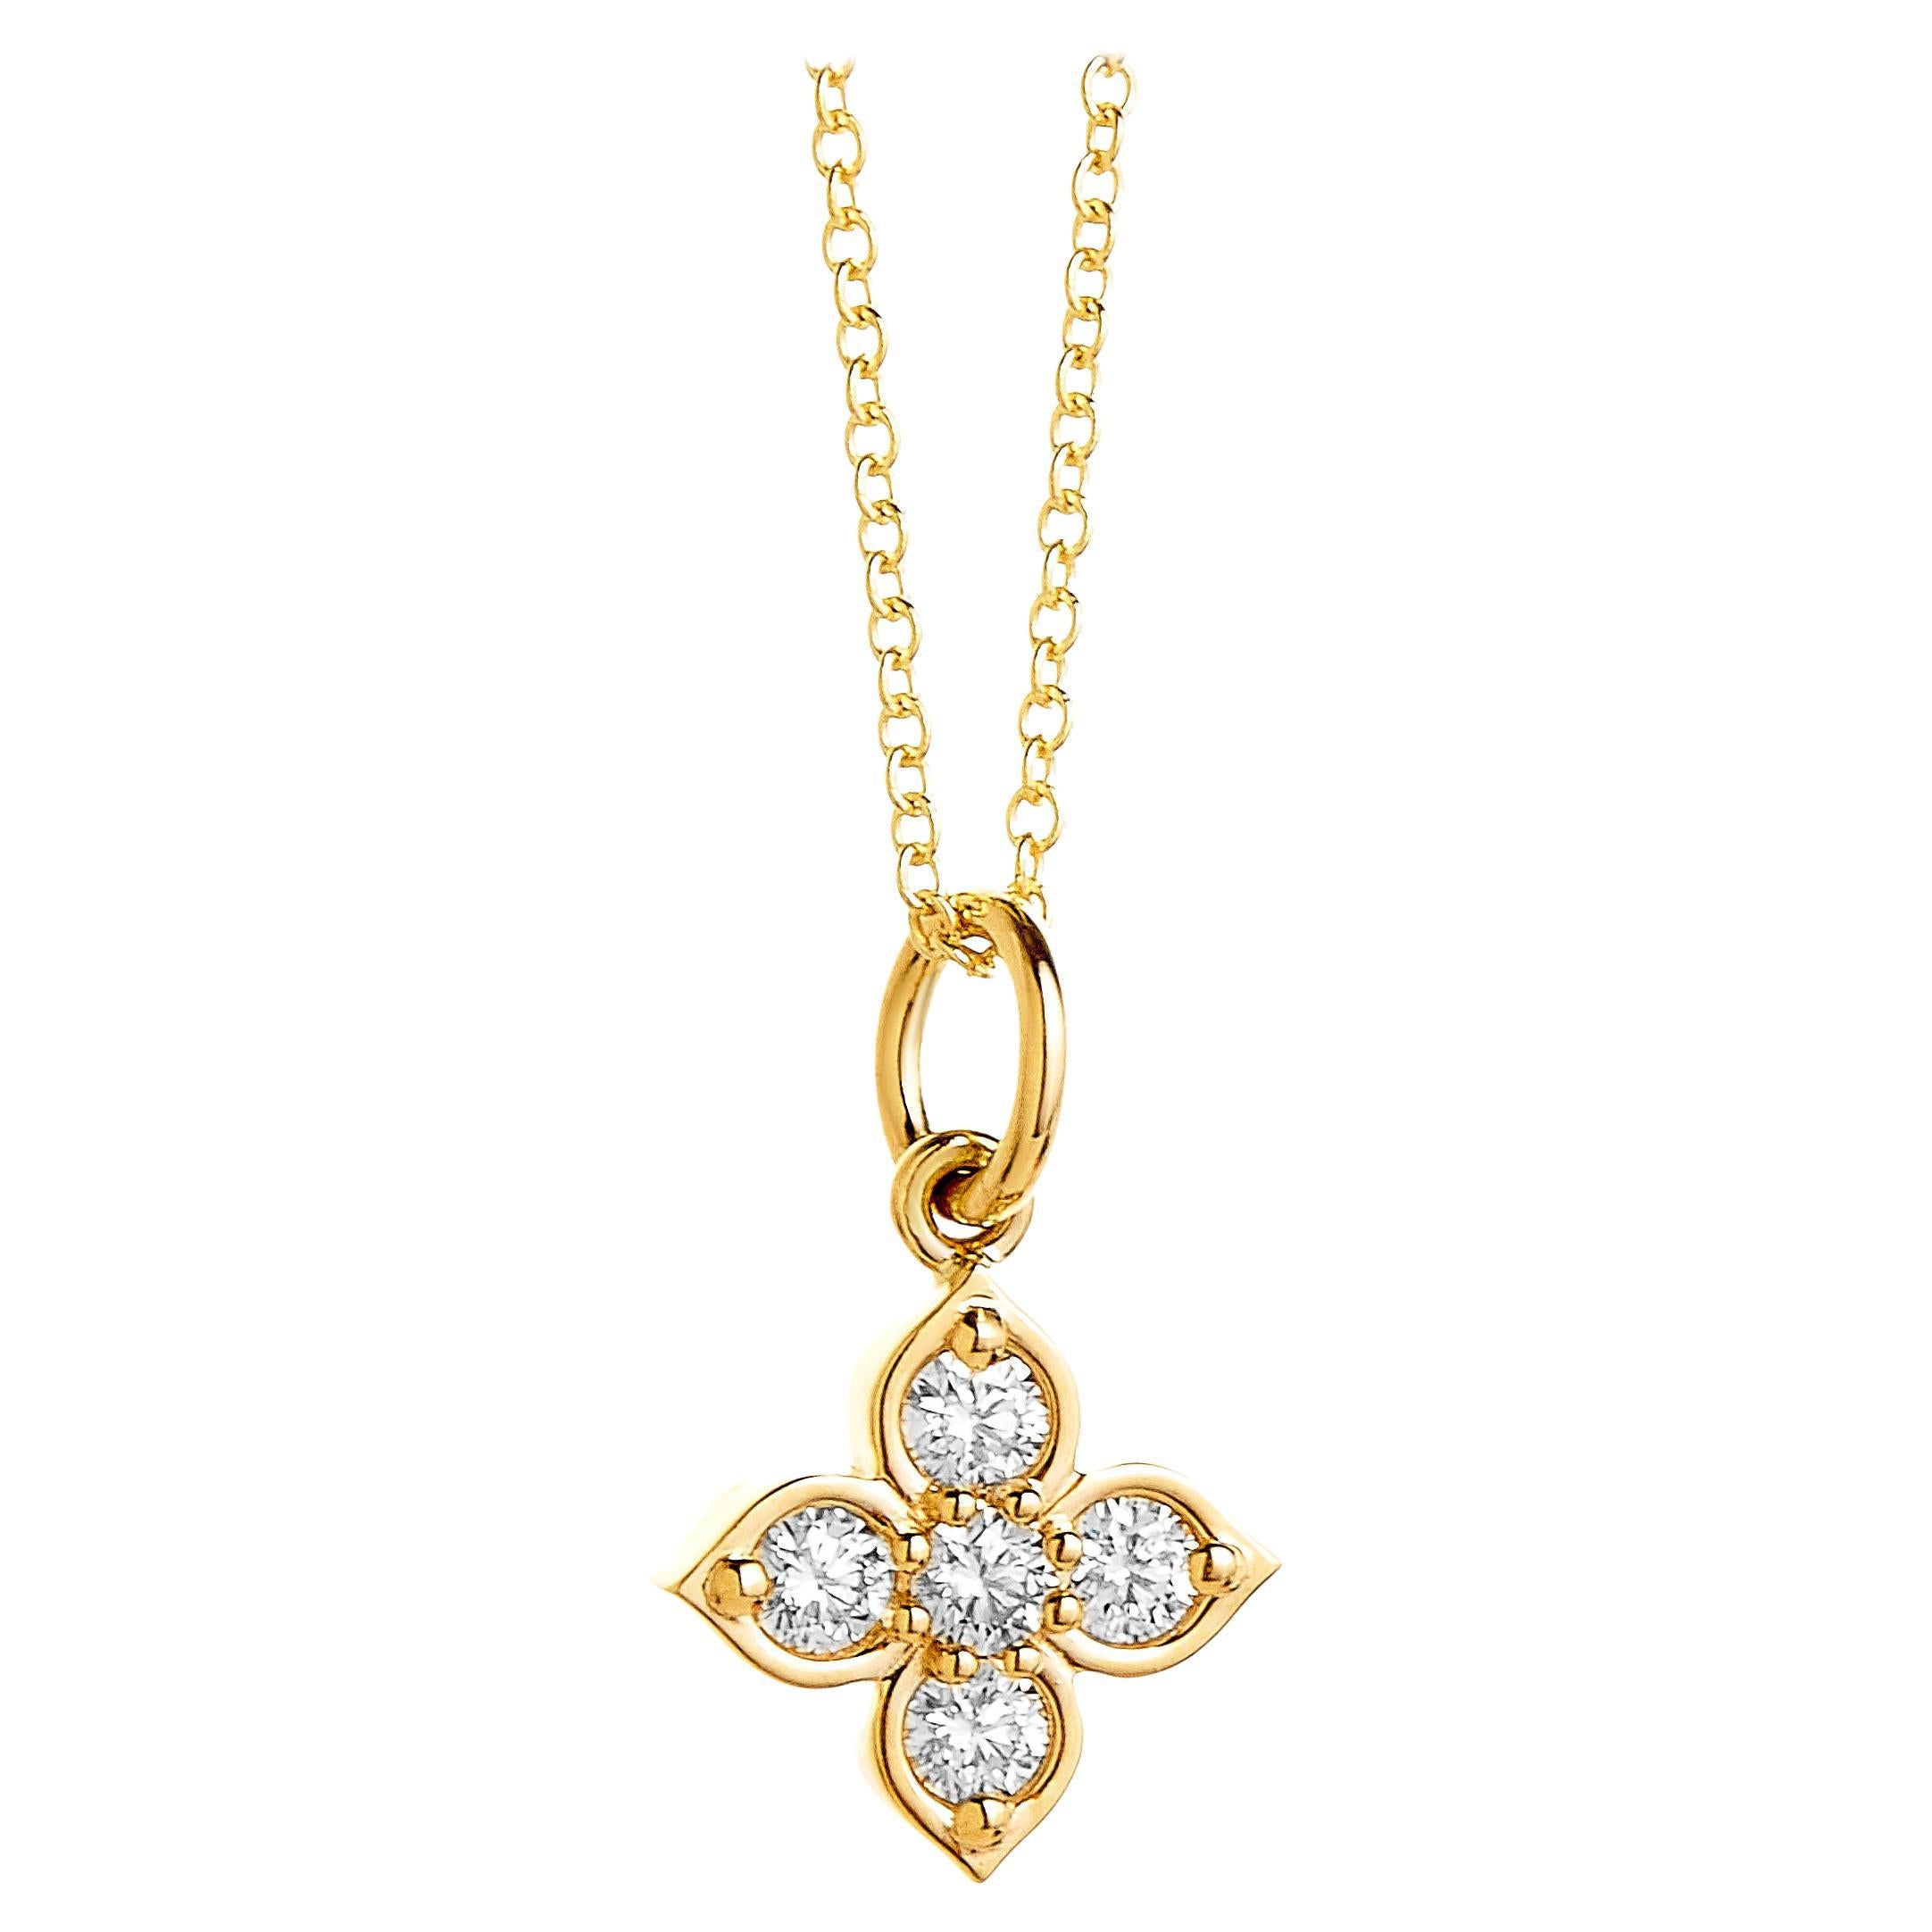 Syna Yellow Gold Flower Pendant with Diamonds